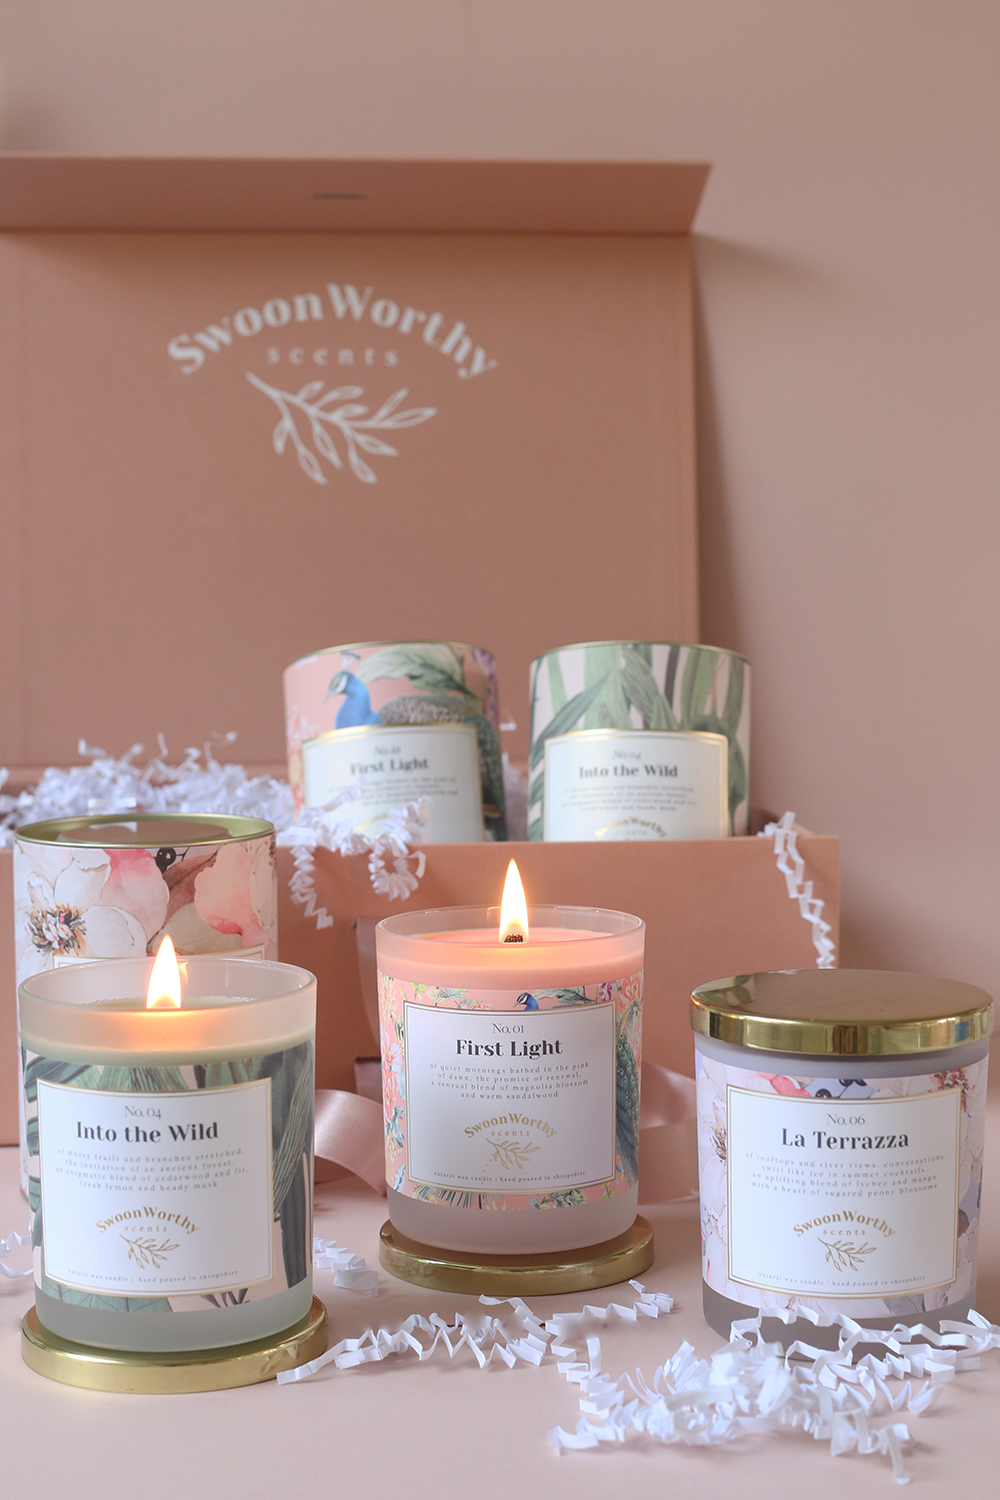 Three candle gift box bundle from Swoon Worthy Scents